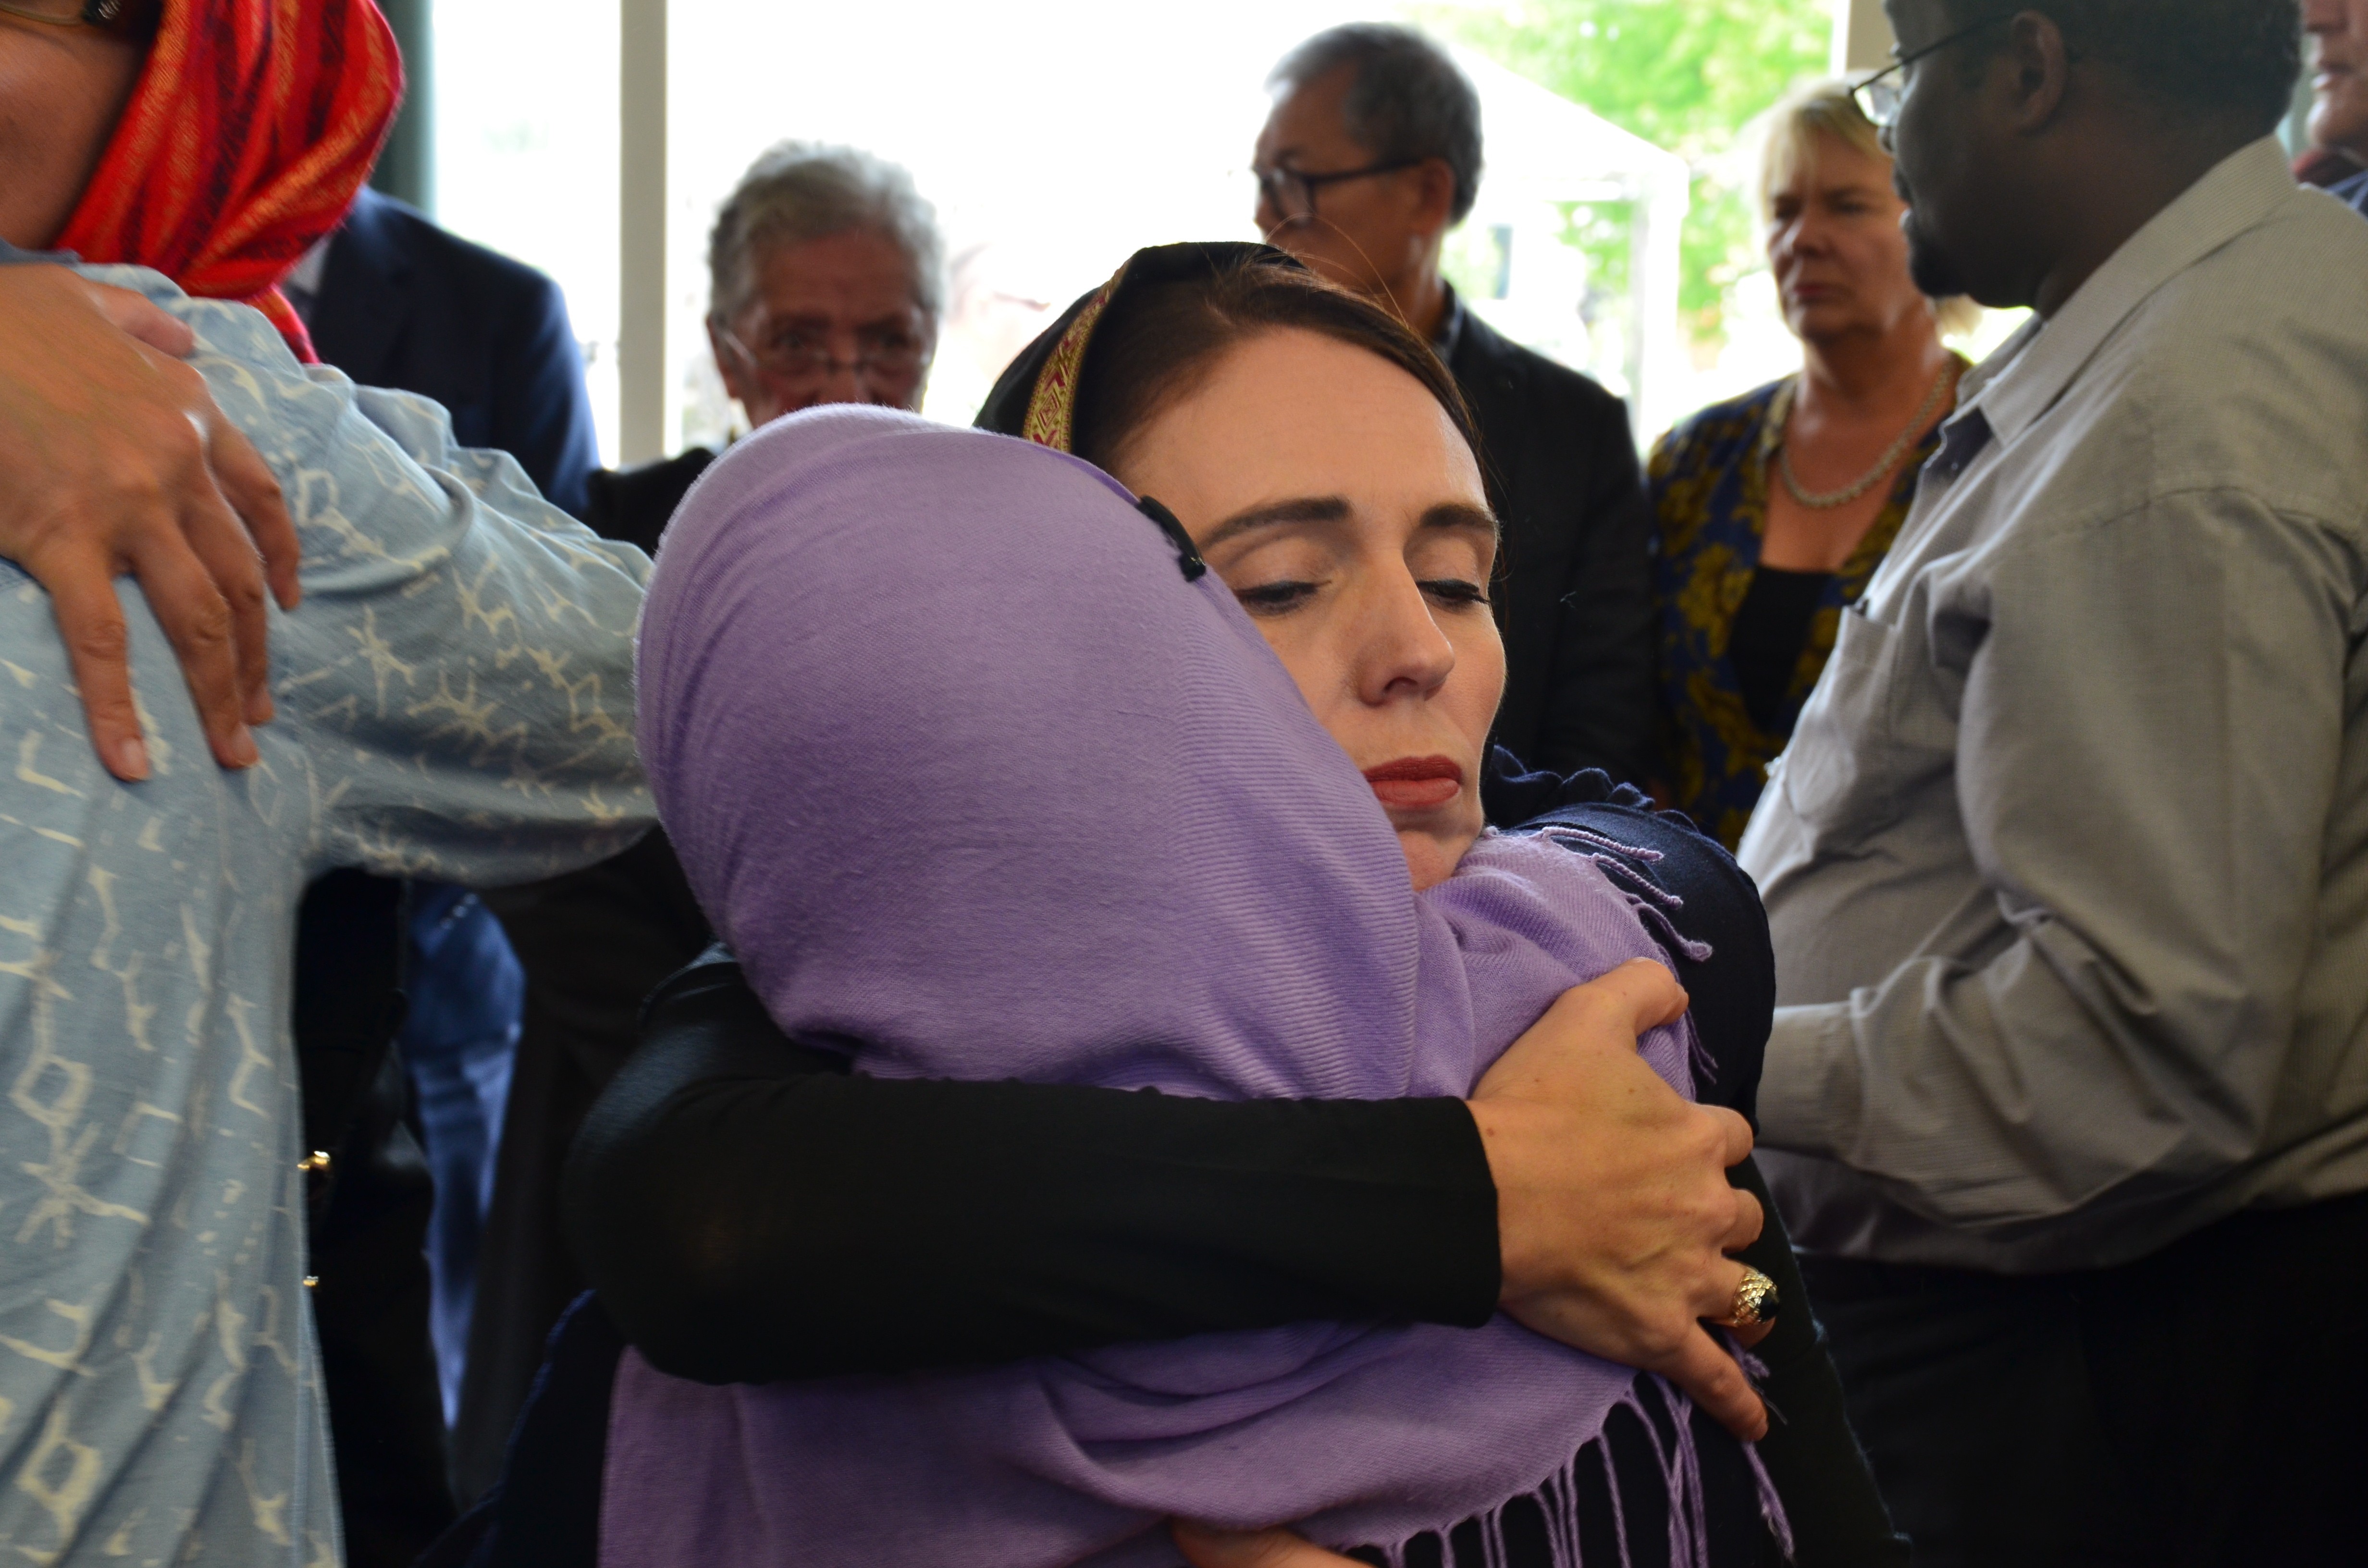 New Zealand Prime Minister Jacinda Ardern (C) with members of the Muslim community in Christchurch. Photo: EPA-EFE